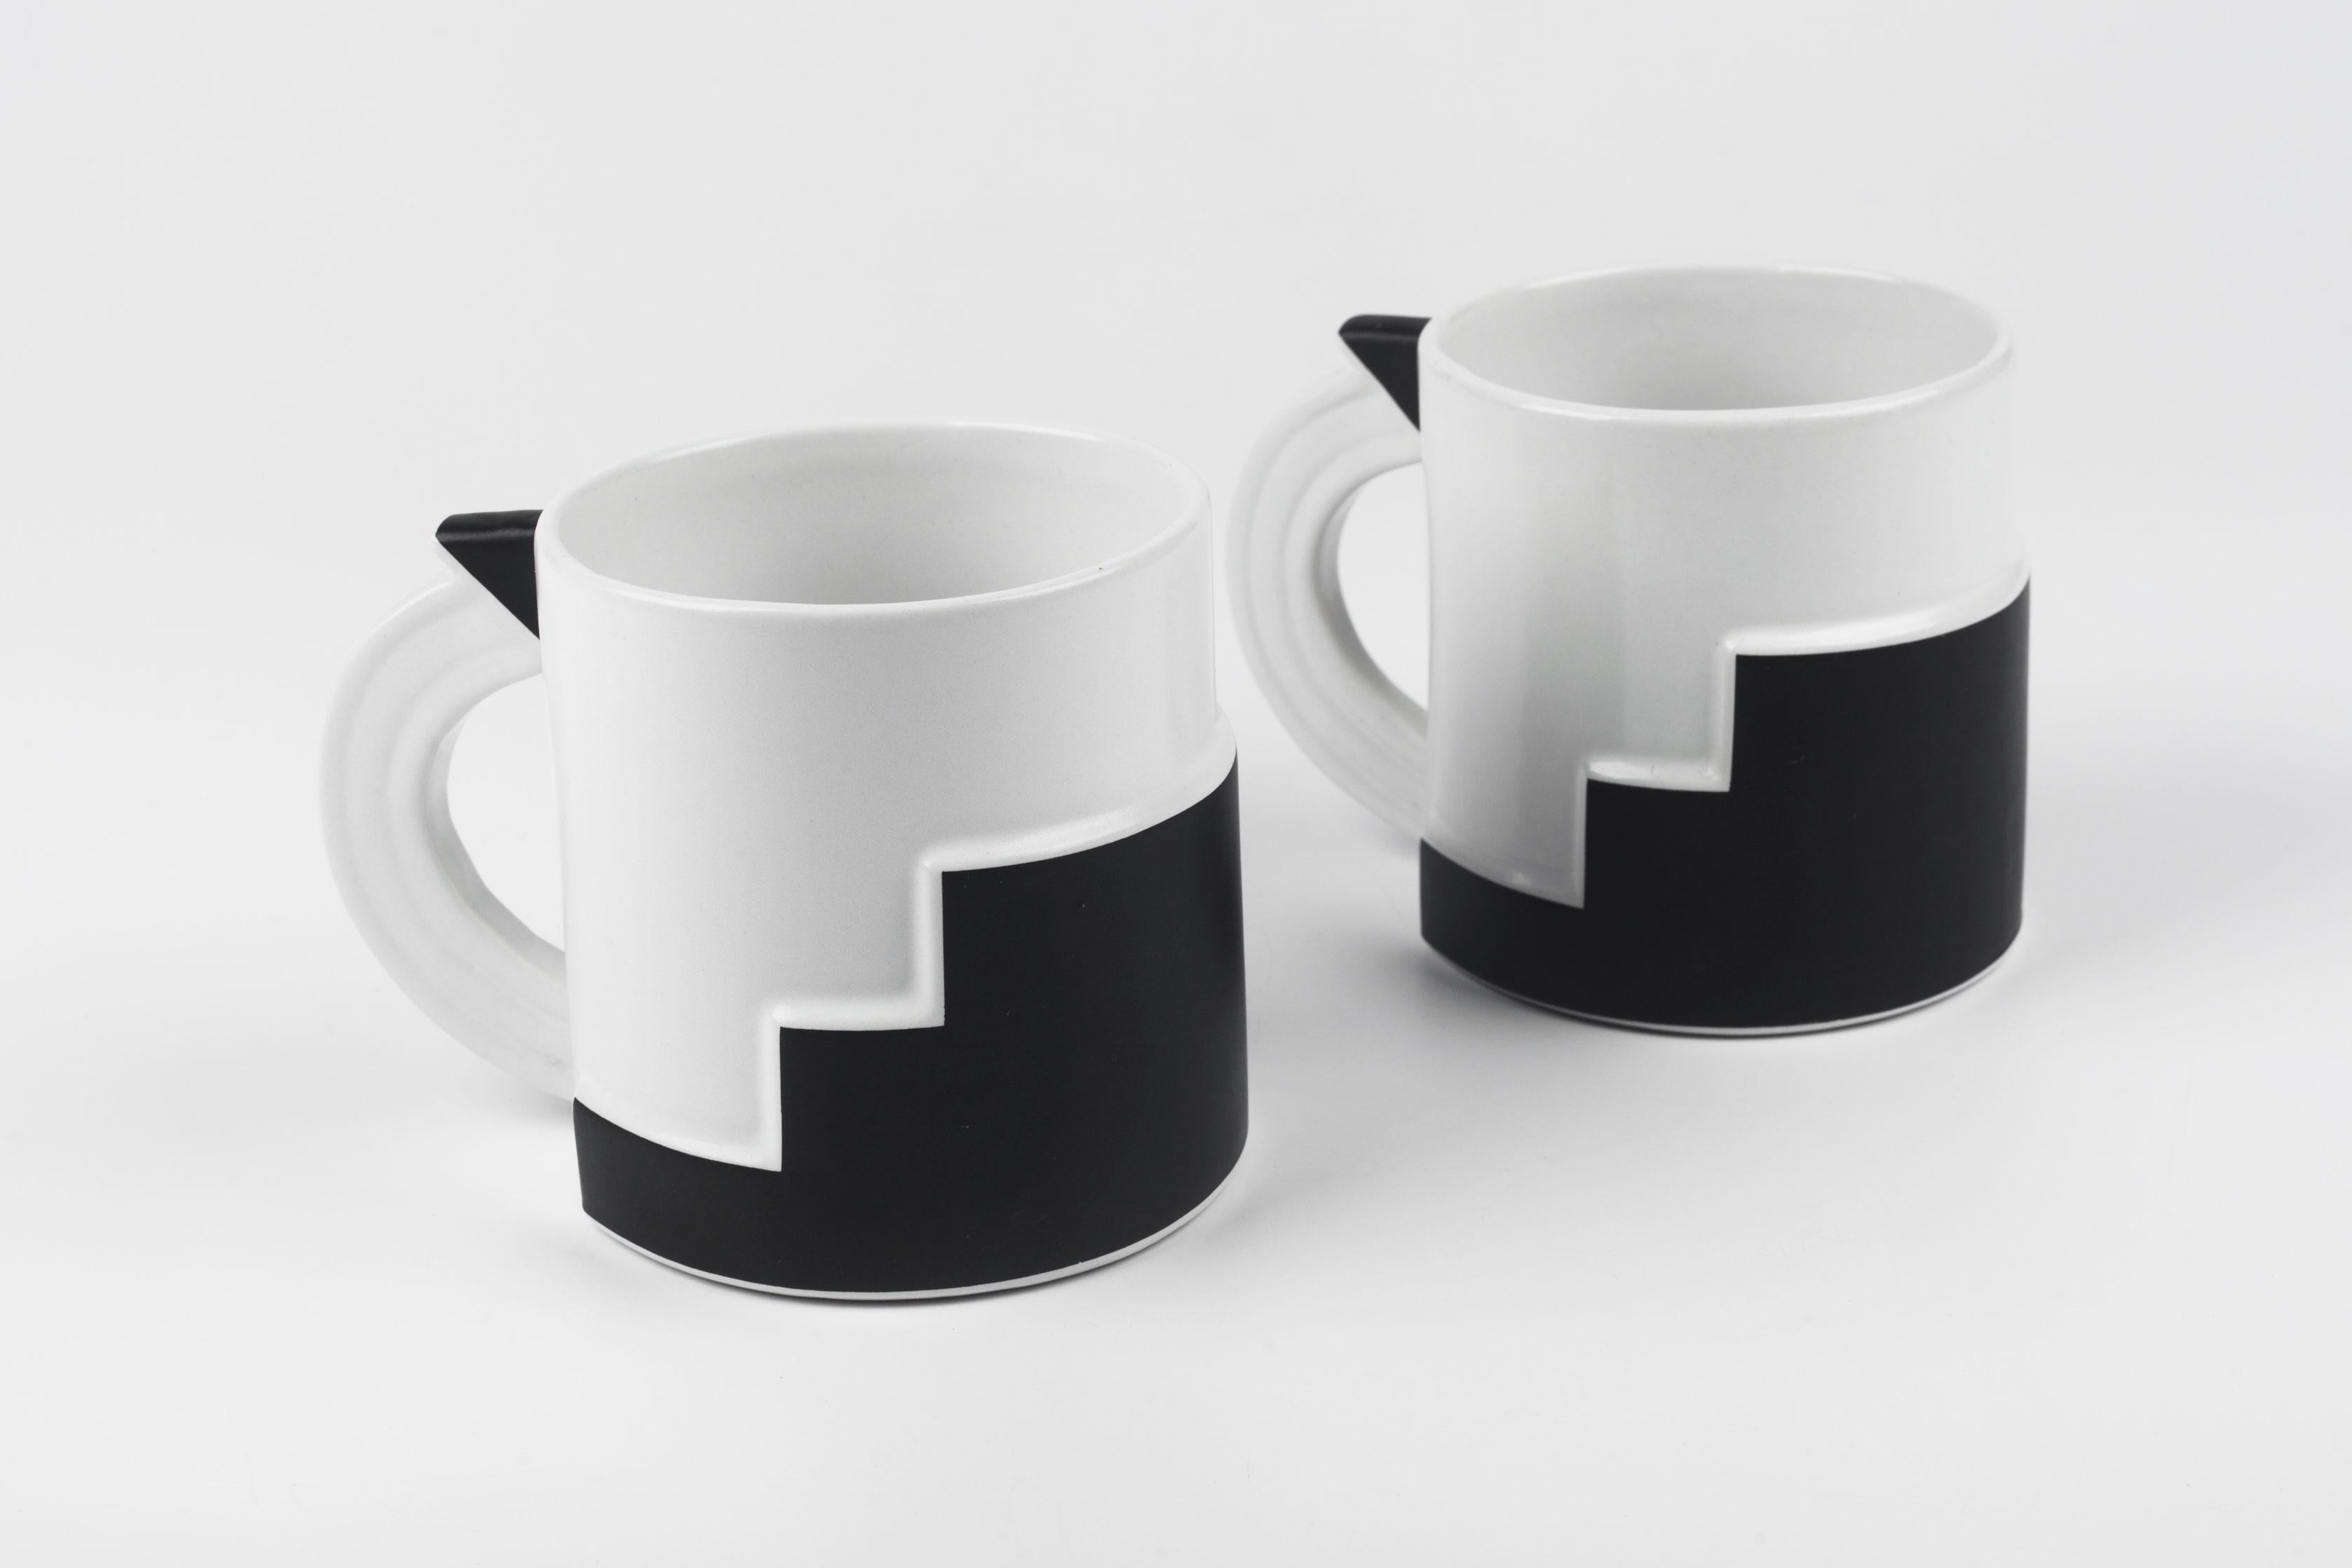 Black and white Art Deco inspired mug from 1980s Japan, designed by Kato Kogei for Fujimori. Black painted areas are matte, and there is a semi-gloss glaze on the white ceramic. Geometric black pattern on the mug has a subtle volume. Art Deco